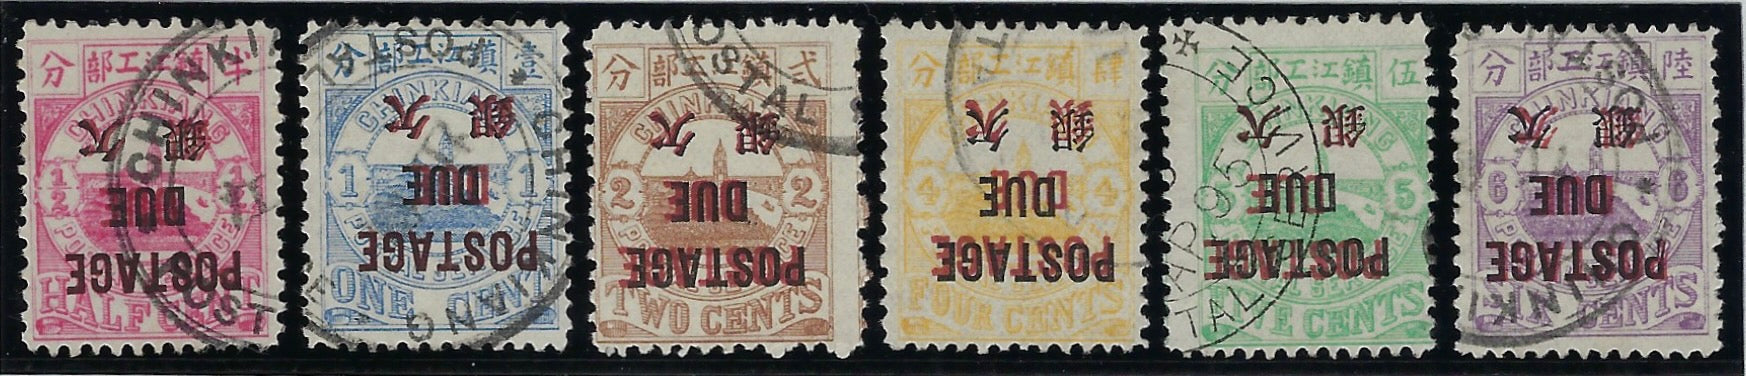 China 1895 (Shanghai) Chingkiang Local Post Postage Dues, SGD23c/29a